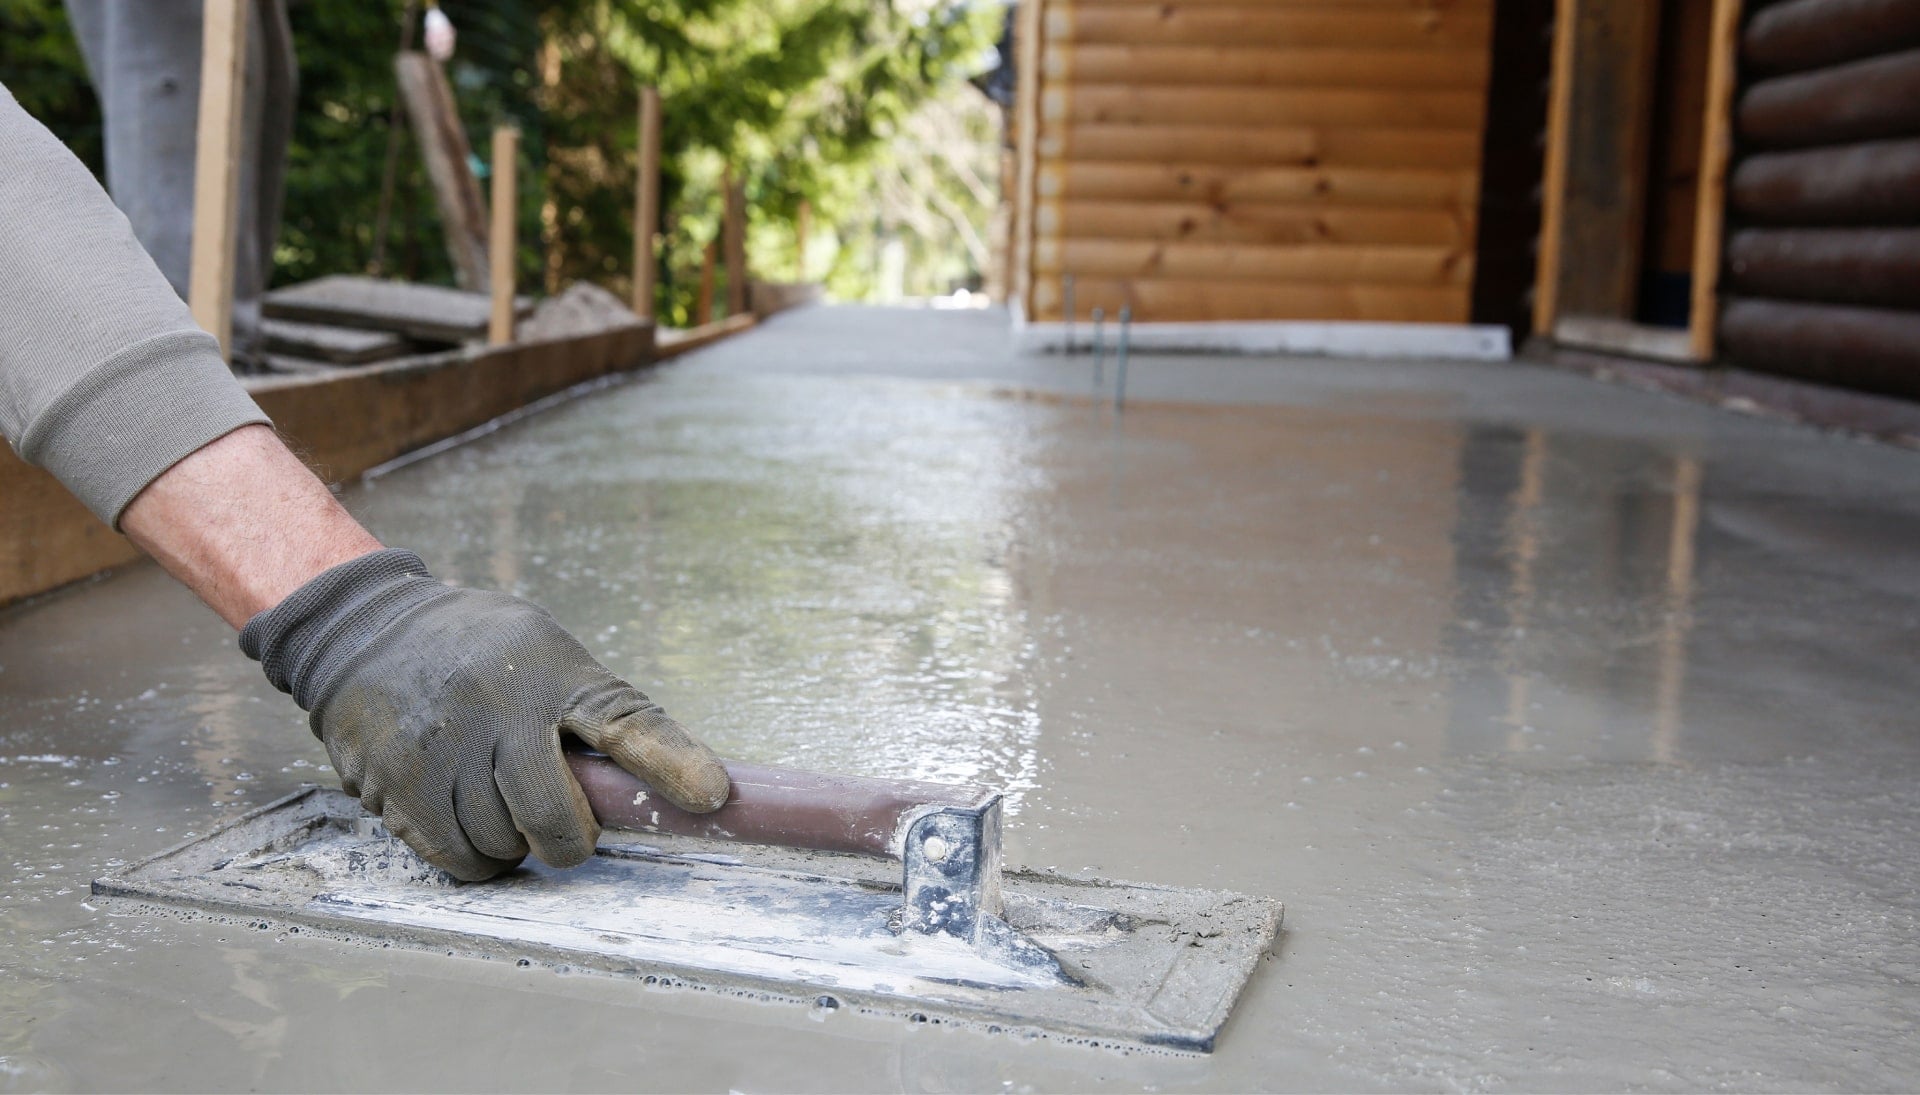 Smooth and Level Your Floors with Precision Concrete Floor Leveling Services in Orange County, CA - Eliminate Uneven Surfaces, Tripping Hazards, and Costly Damages with State-of-the-Art Equipment and Skilled Professionals.